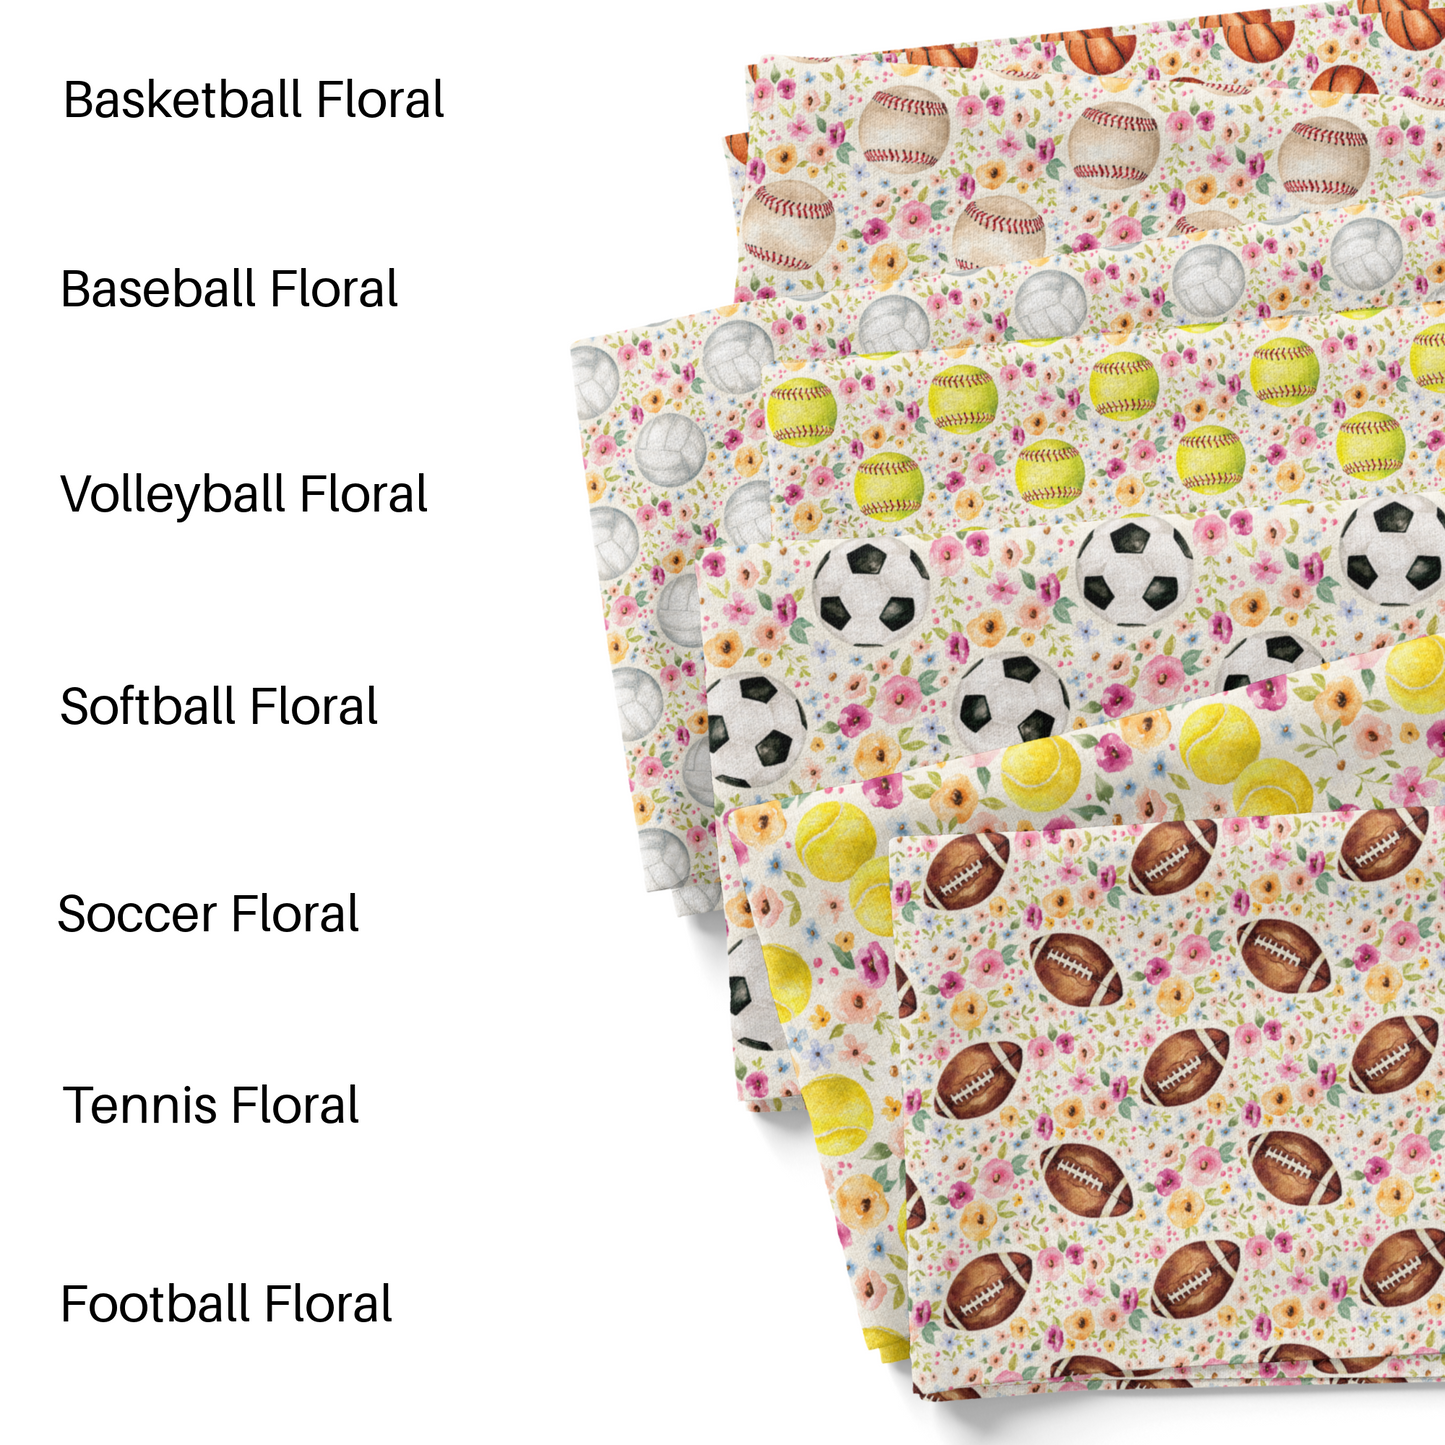 Cate and Rainn Spring Florals and Sports themed fabric by the yard swatches.